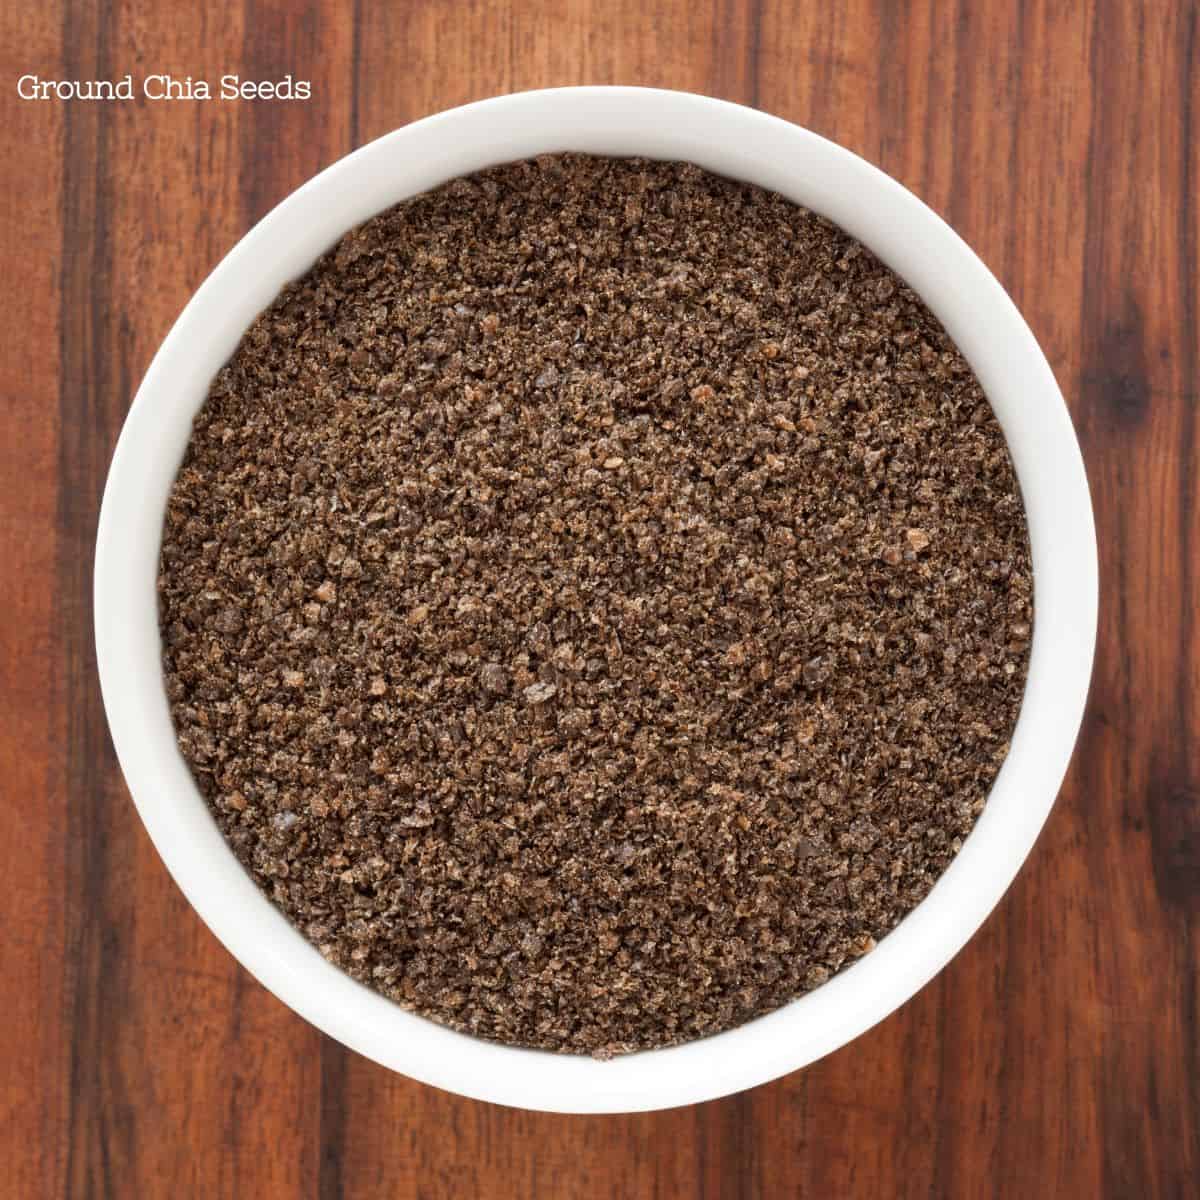 Close-up view of ground chia seeds in a white bowl on a wooden surface